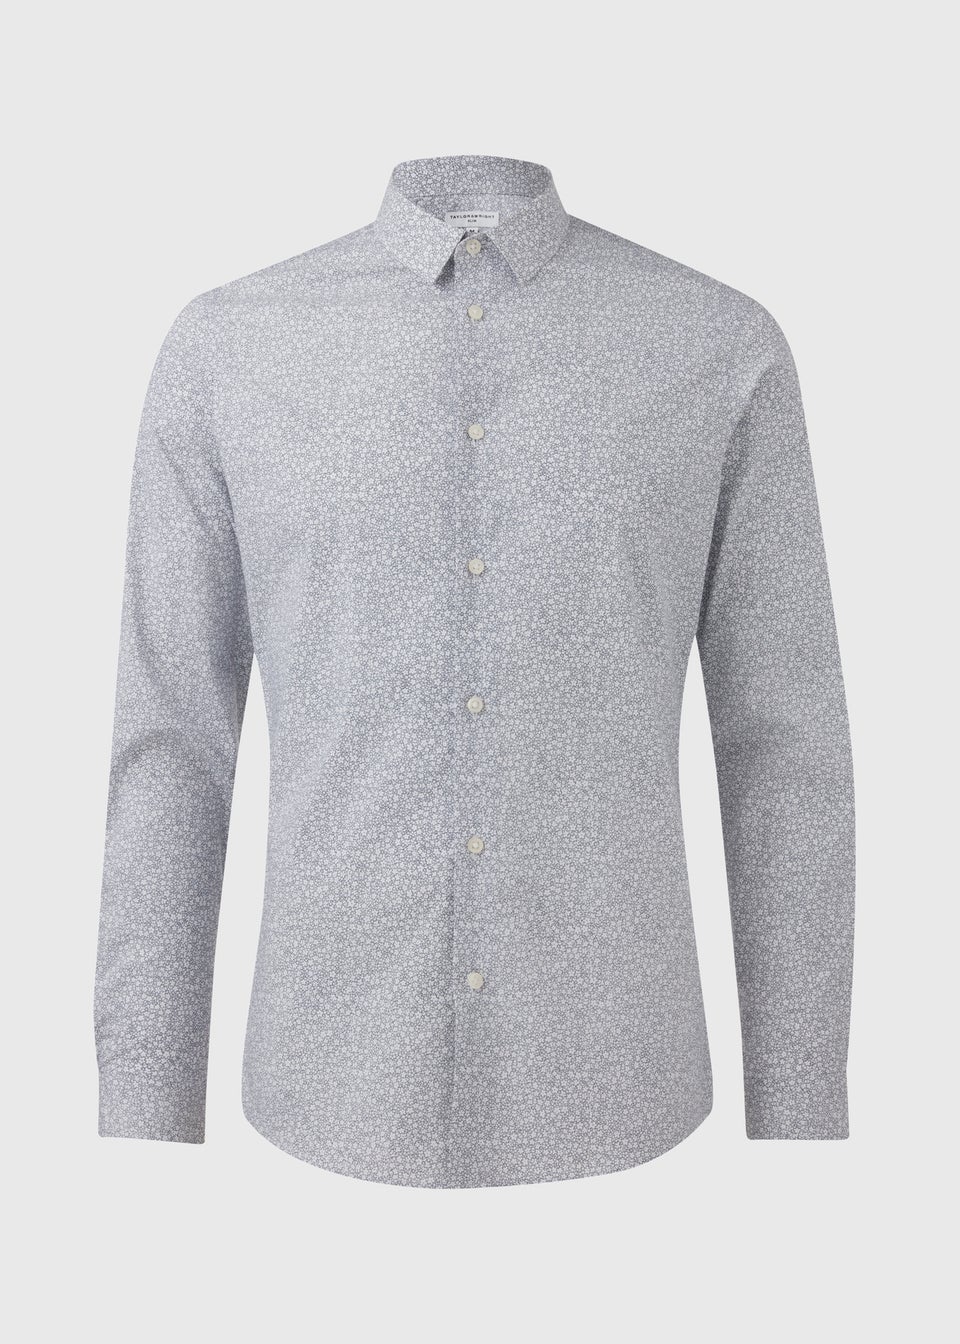 Taylor & Wright Grey Floral Slim Fit Shirt